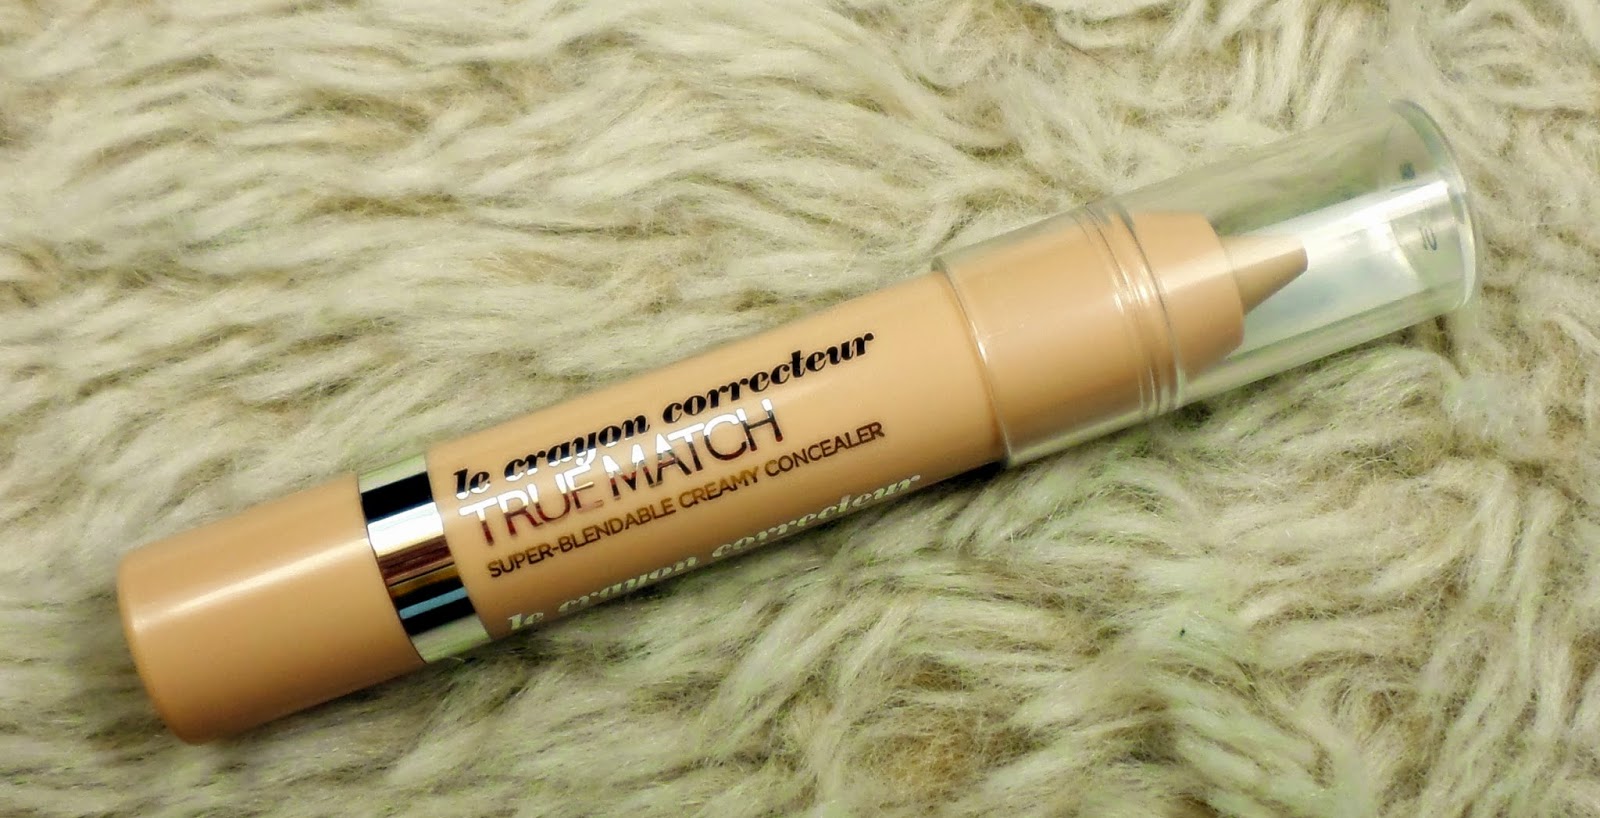 L'Oreal True Match Super-Blendable Creamy Concealer in 10 Ivory